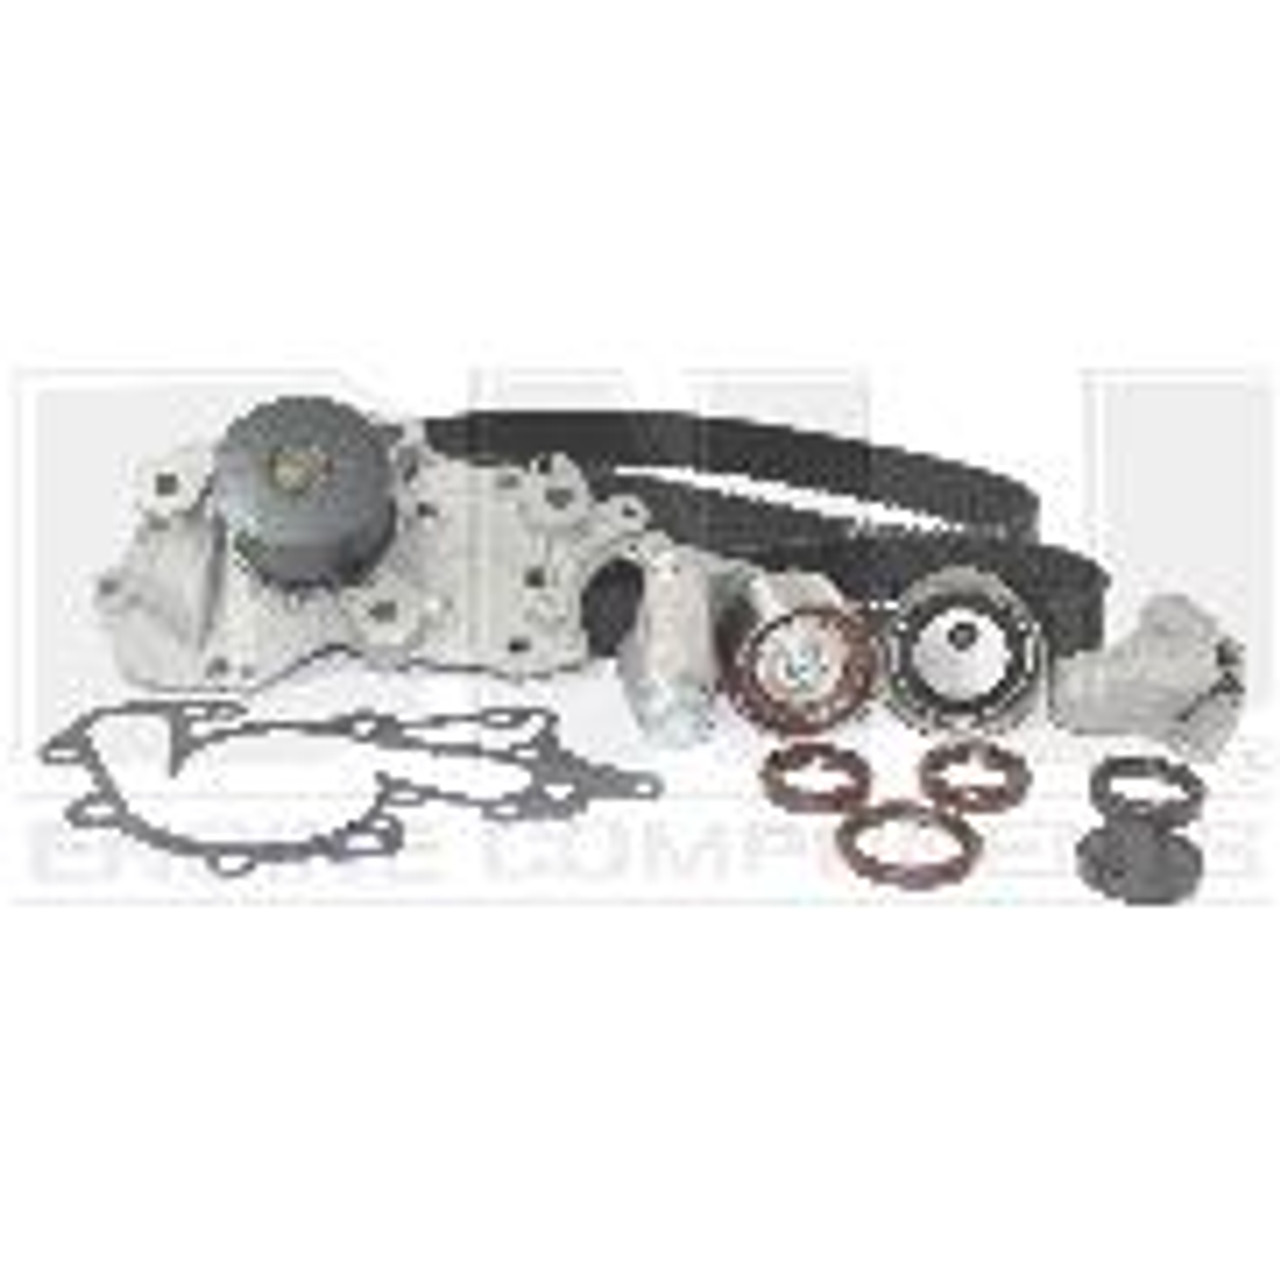 2008 Kia Rondo 2.7L Engine Timing Belt Kit with Water Pump TBK182WP -10